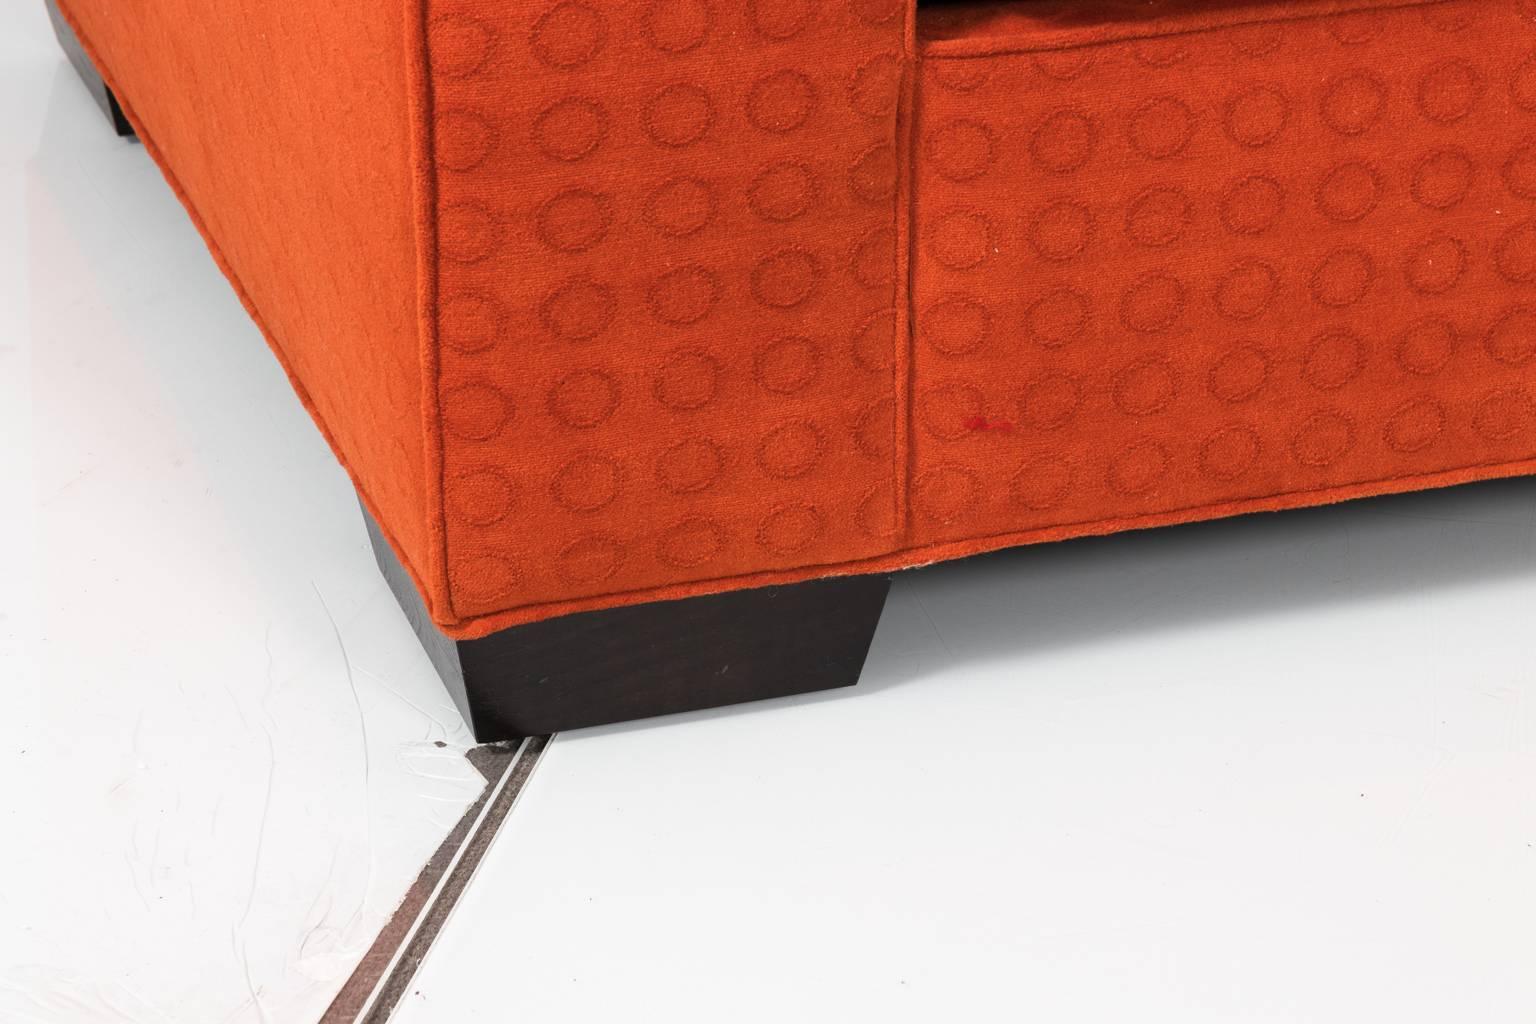 Contemporary modern upholstered sofa in a flame orange fabric.
 